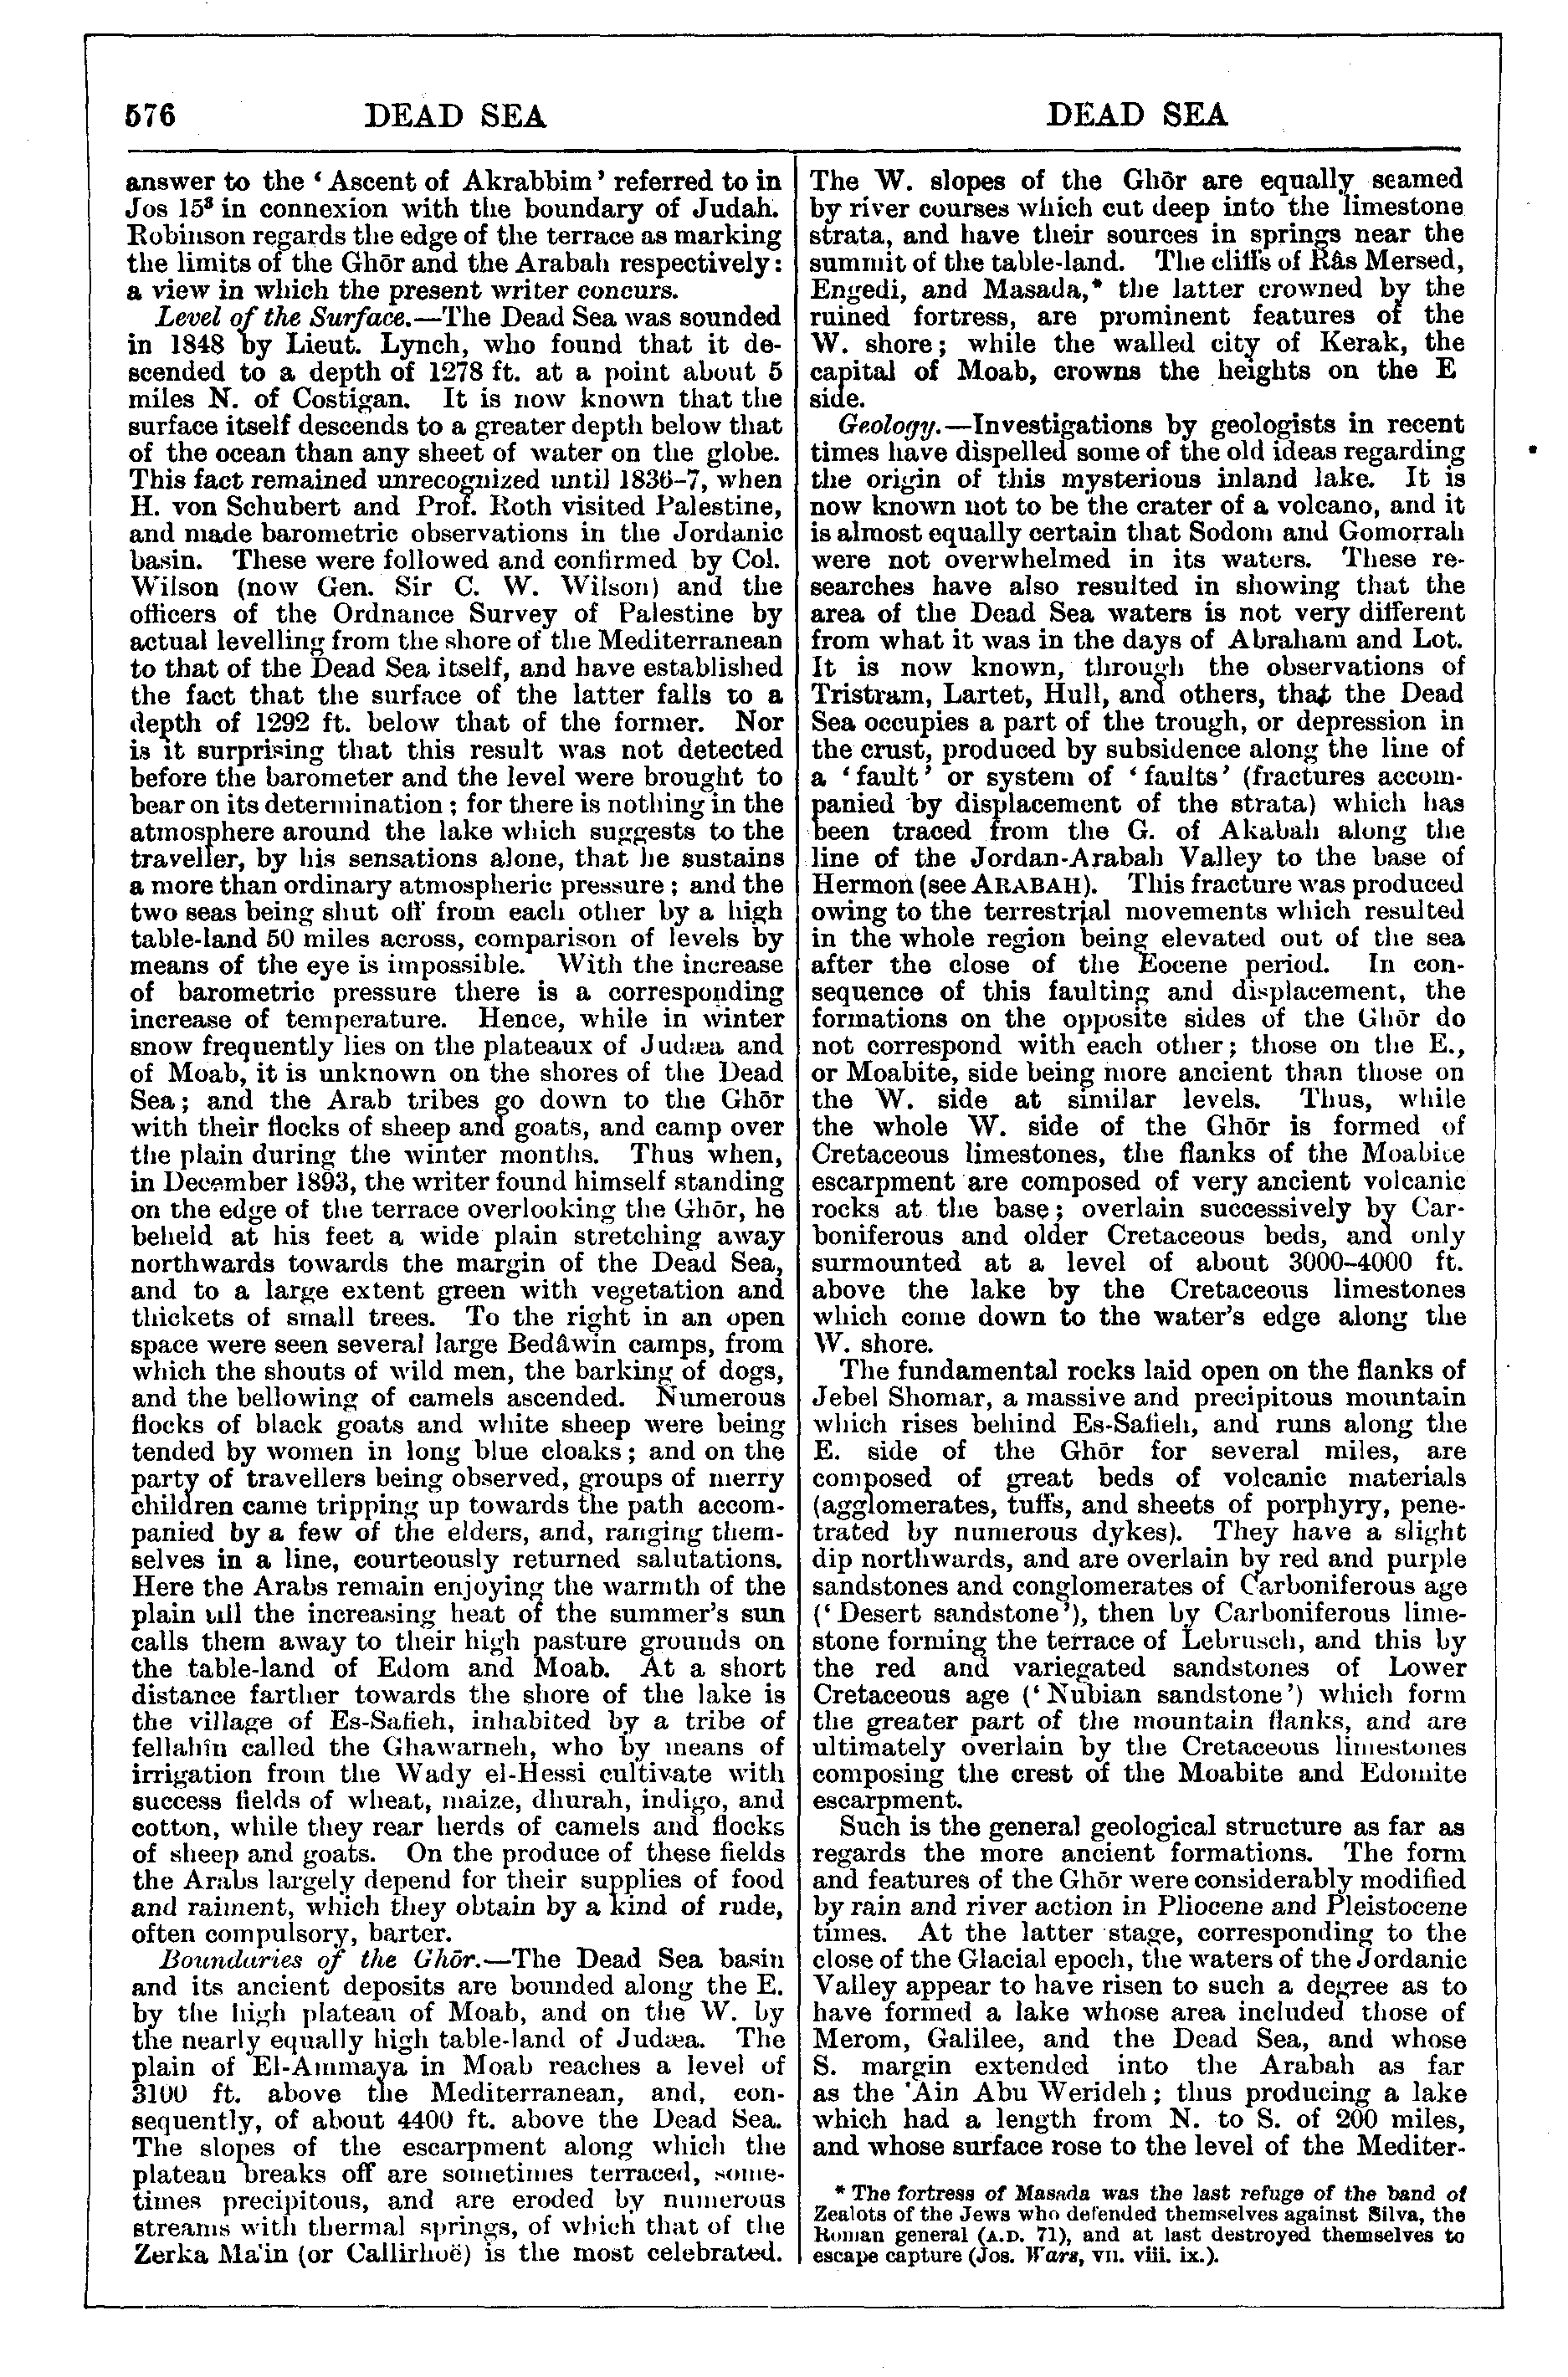 Image of page 576